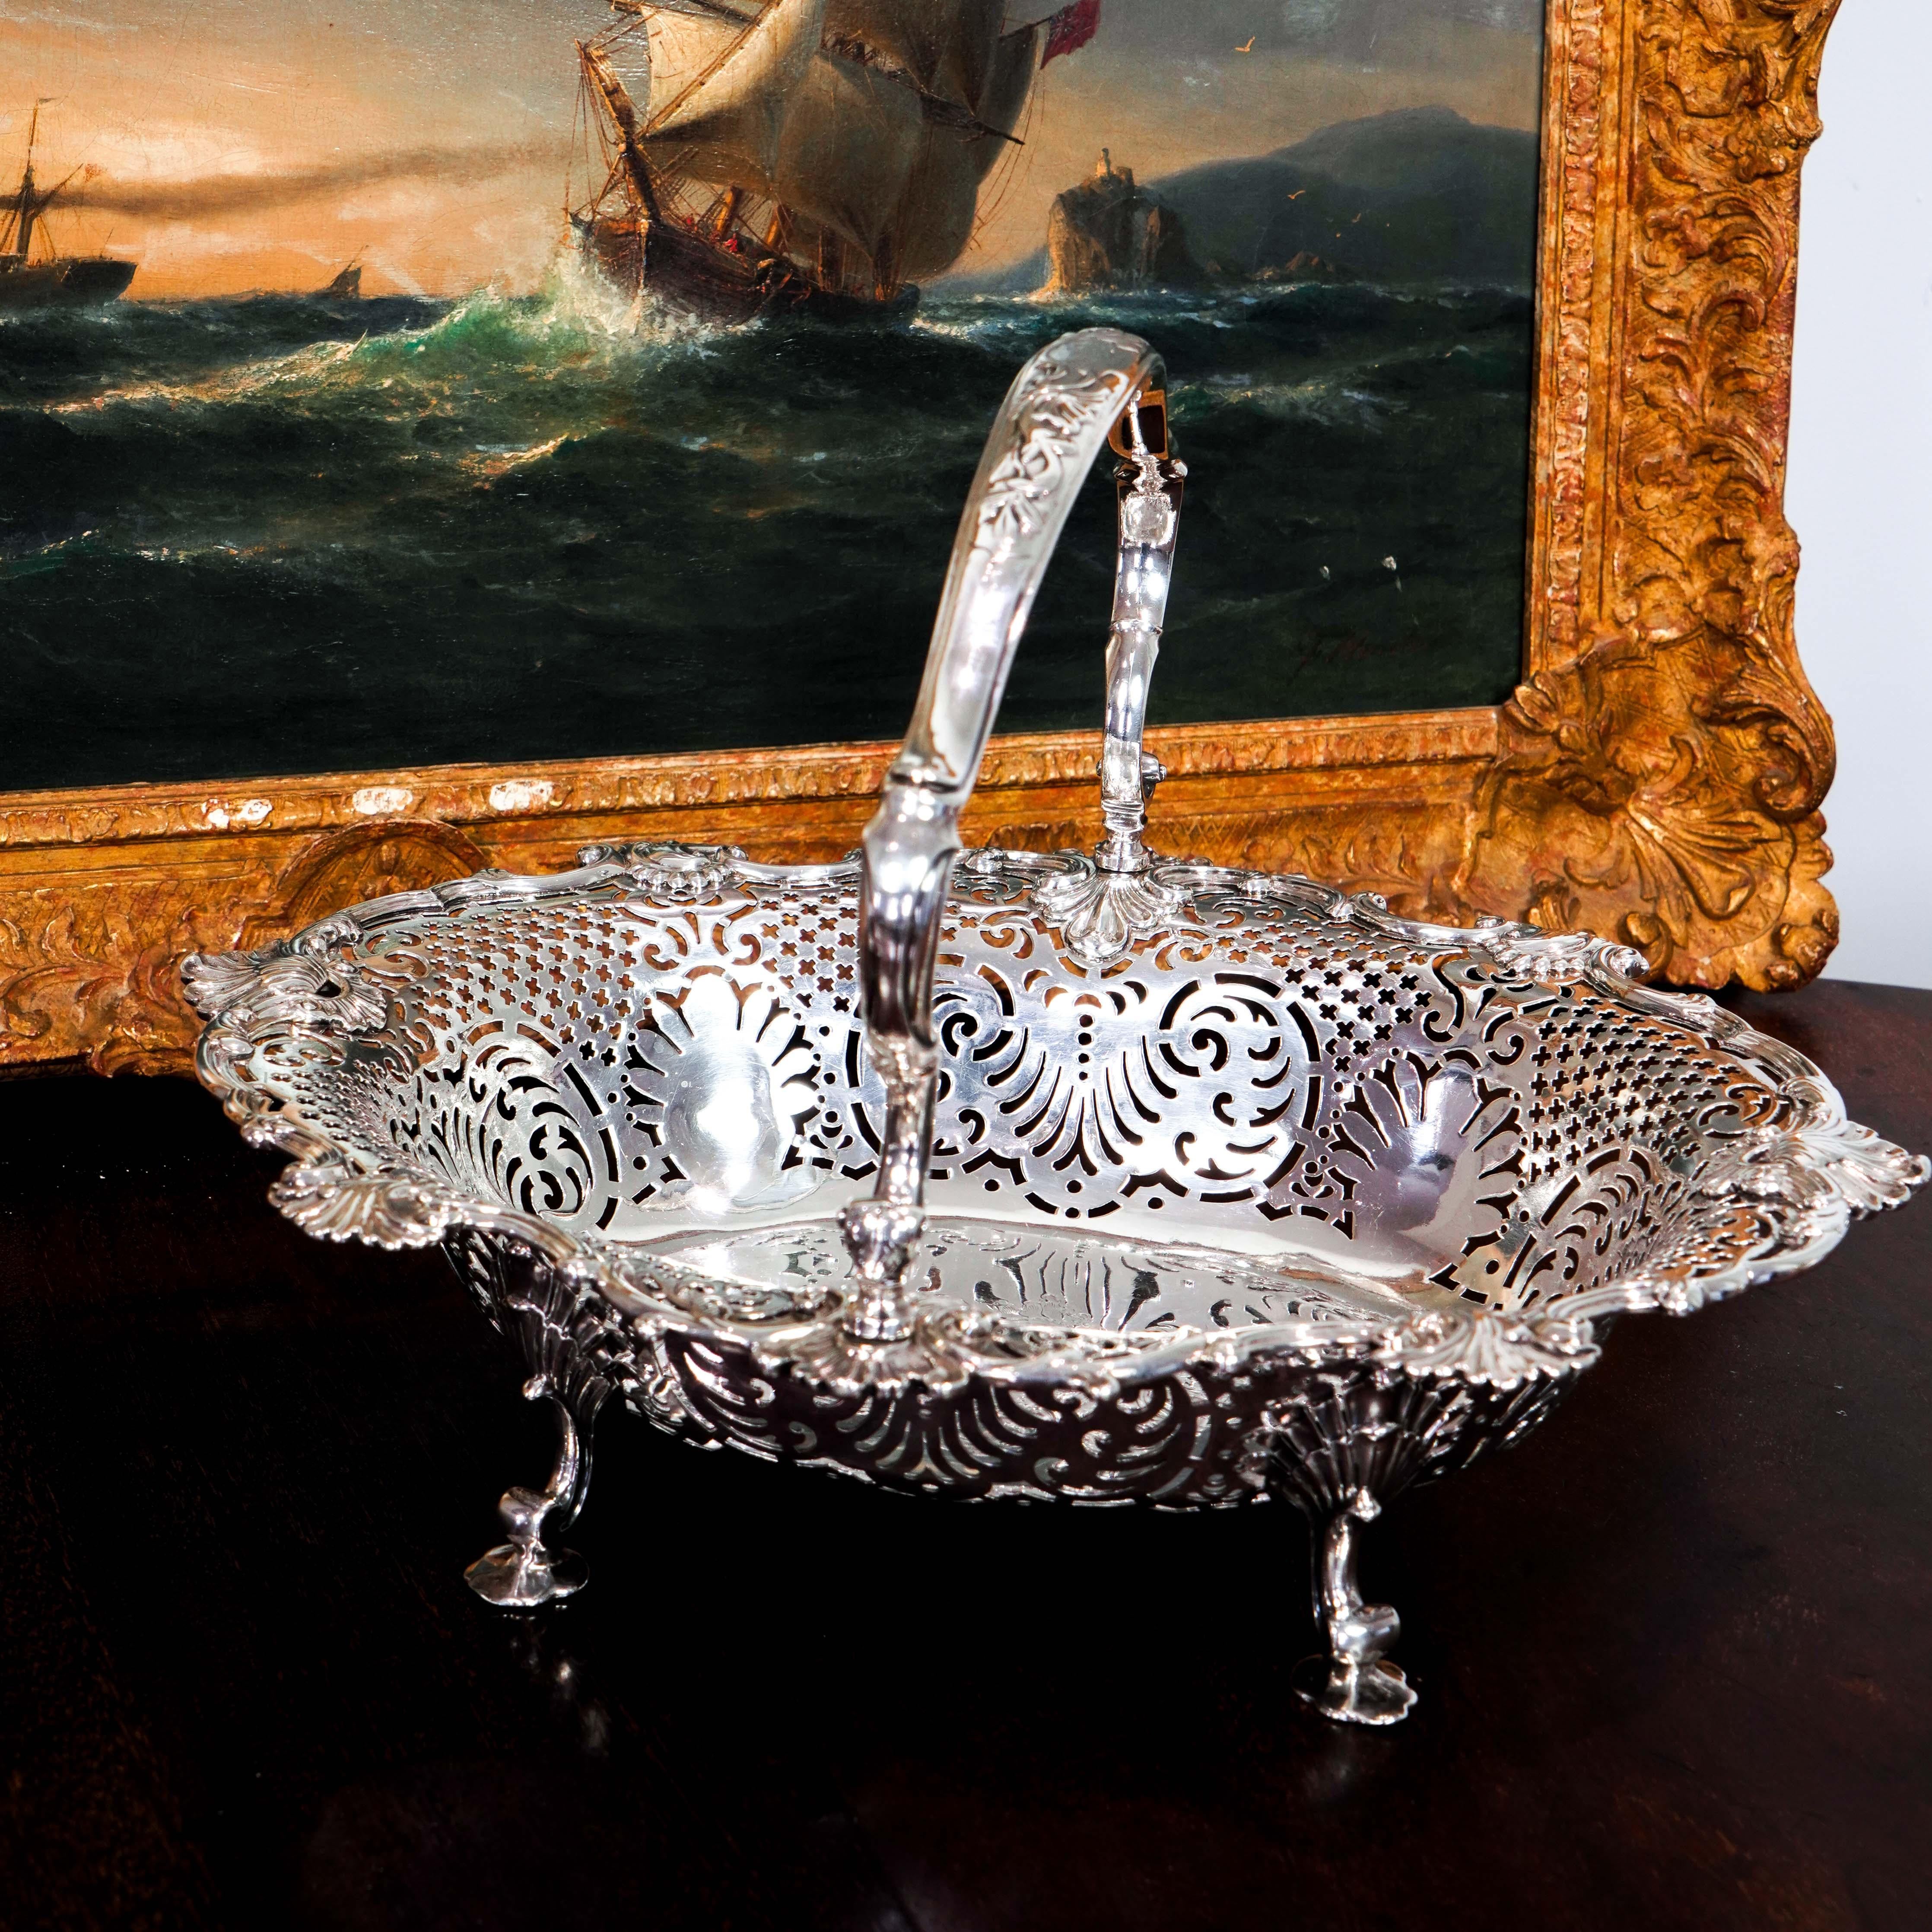 We are delighted to offer this magnificent Georgian solid silver basket made in London, 1804 by the acclaimed Royal gold/silversmith, Garrard (marks for Robert Garrard).
 
Garrard (founded in 1735, surviving the test of time, still producing fine